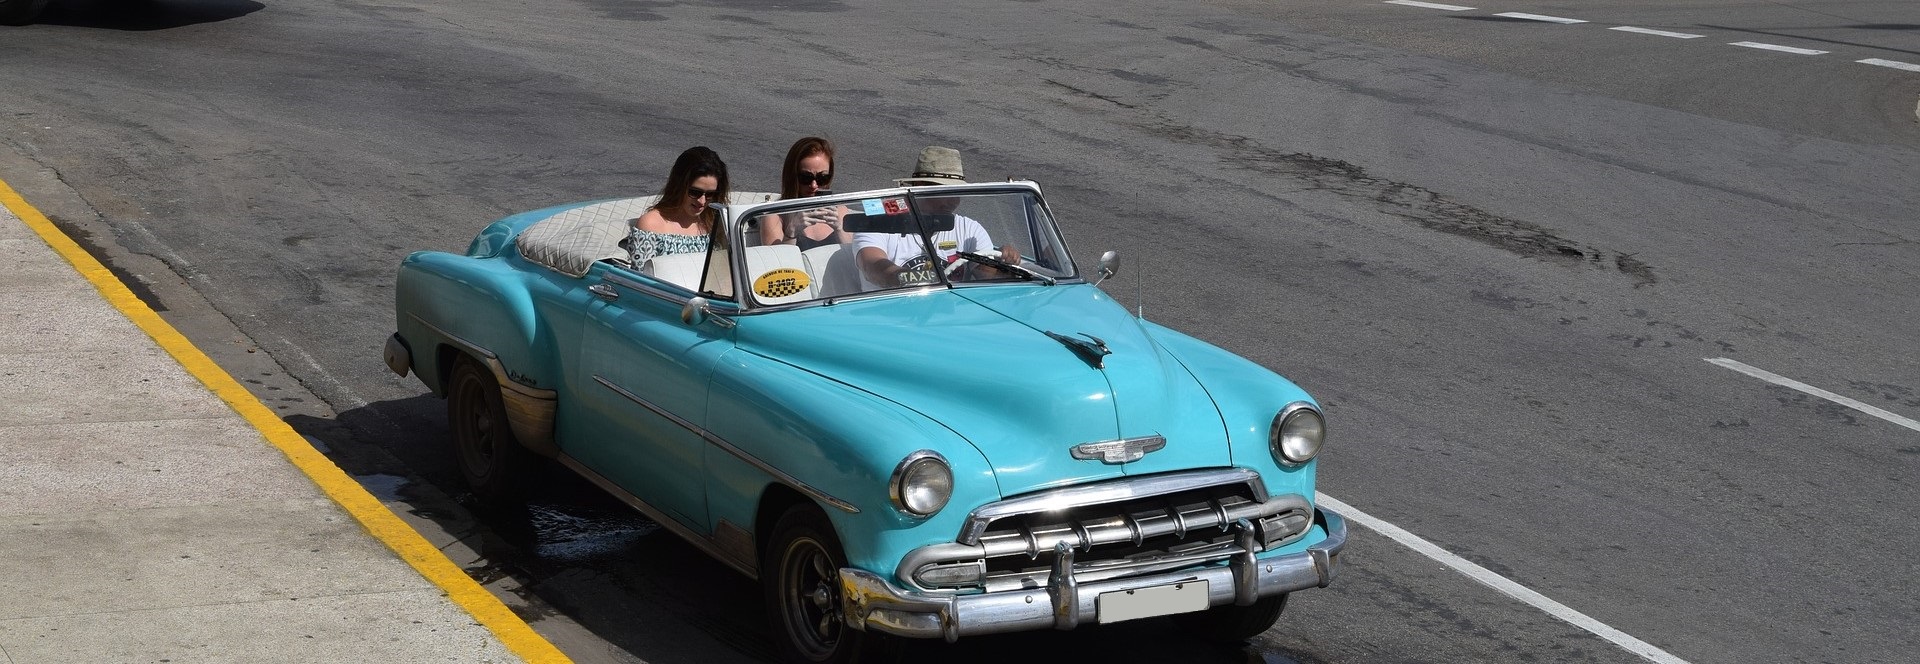 Oldtimer Car in Yonkers, New York | Breast Cancer Car Donations